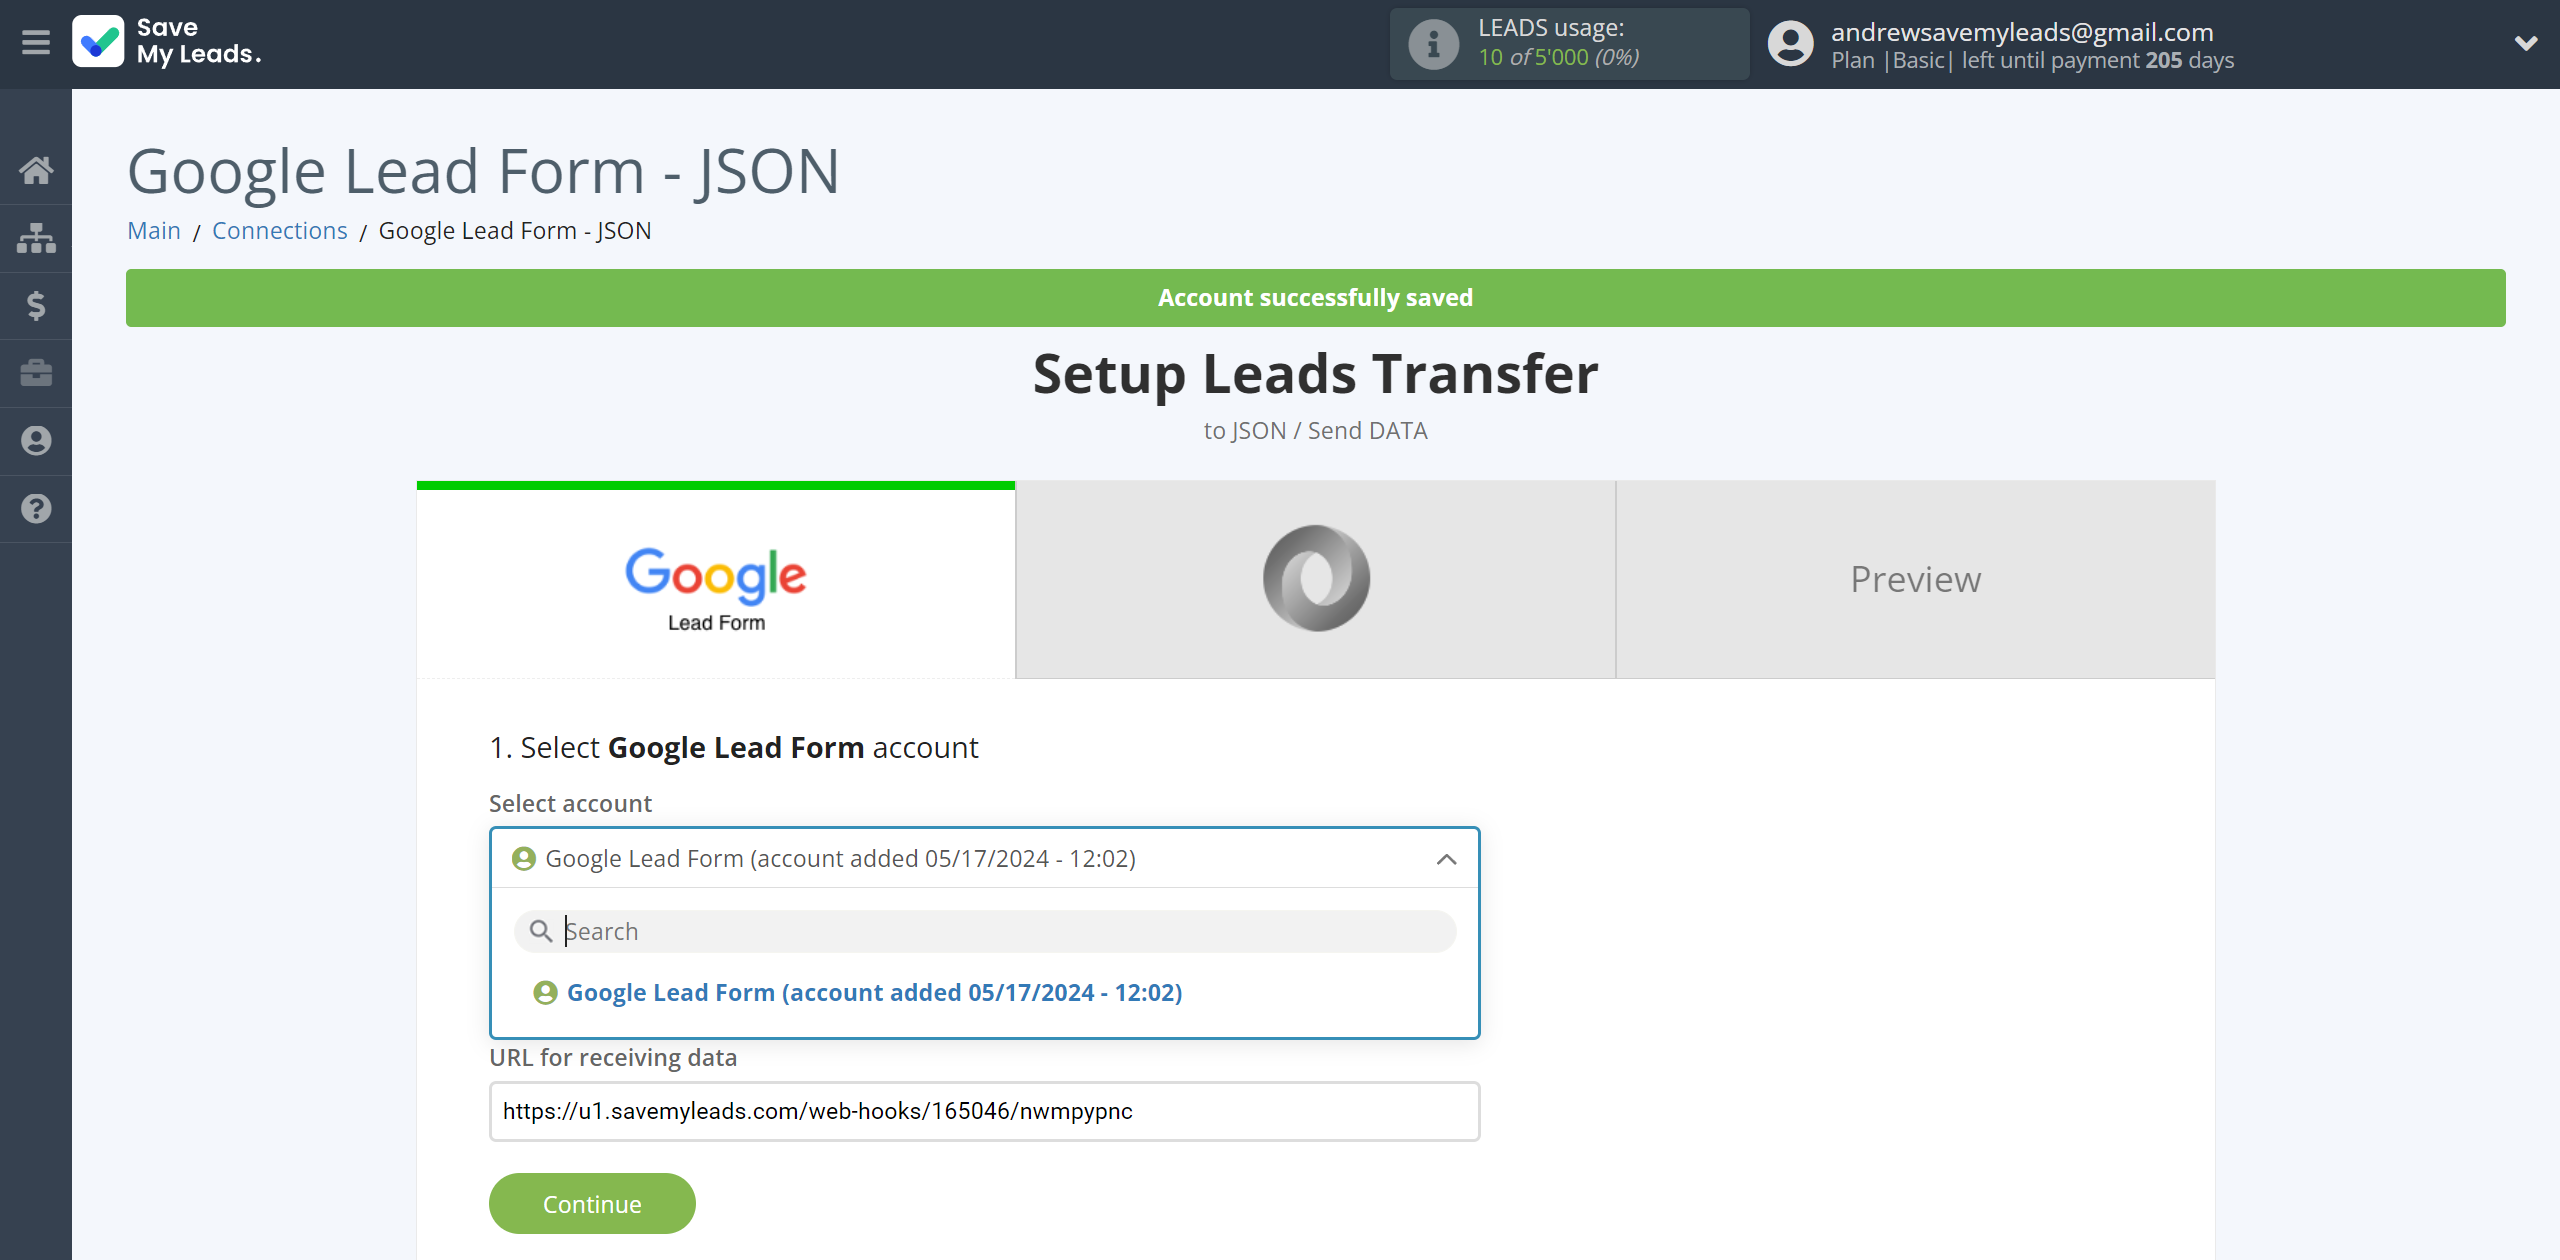 How to Connect Google Lead Form with JSON | Data Source account selection